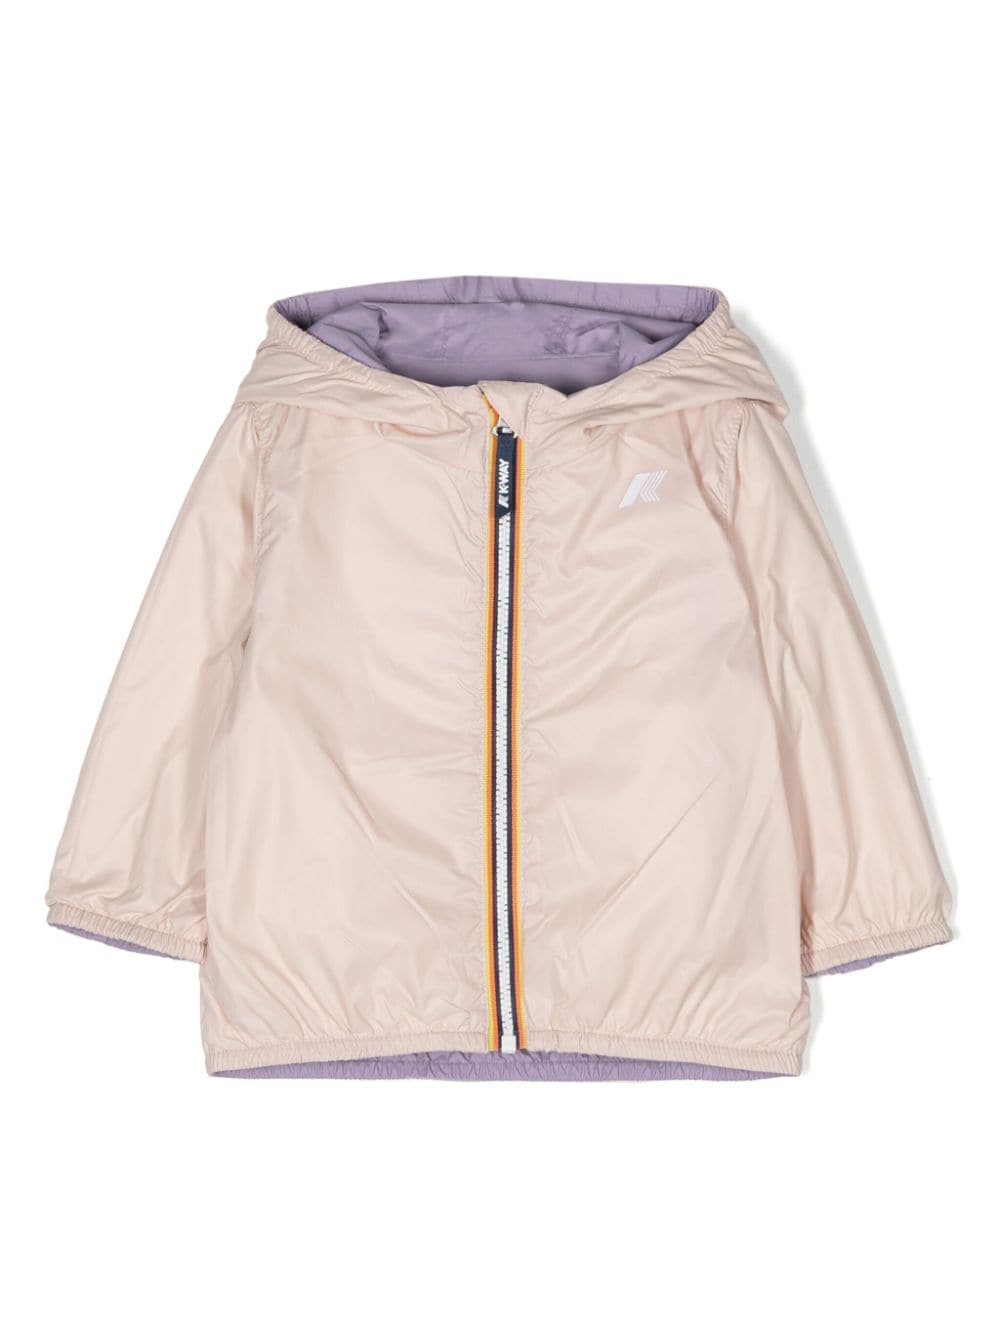 Purple and pink jacket for baby girls with logo